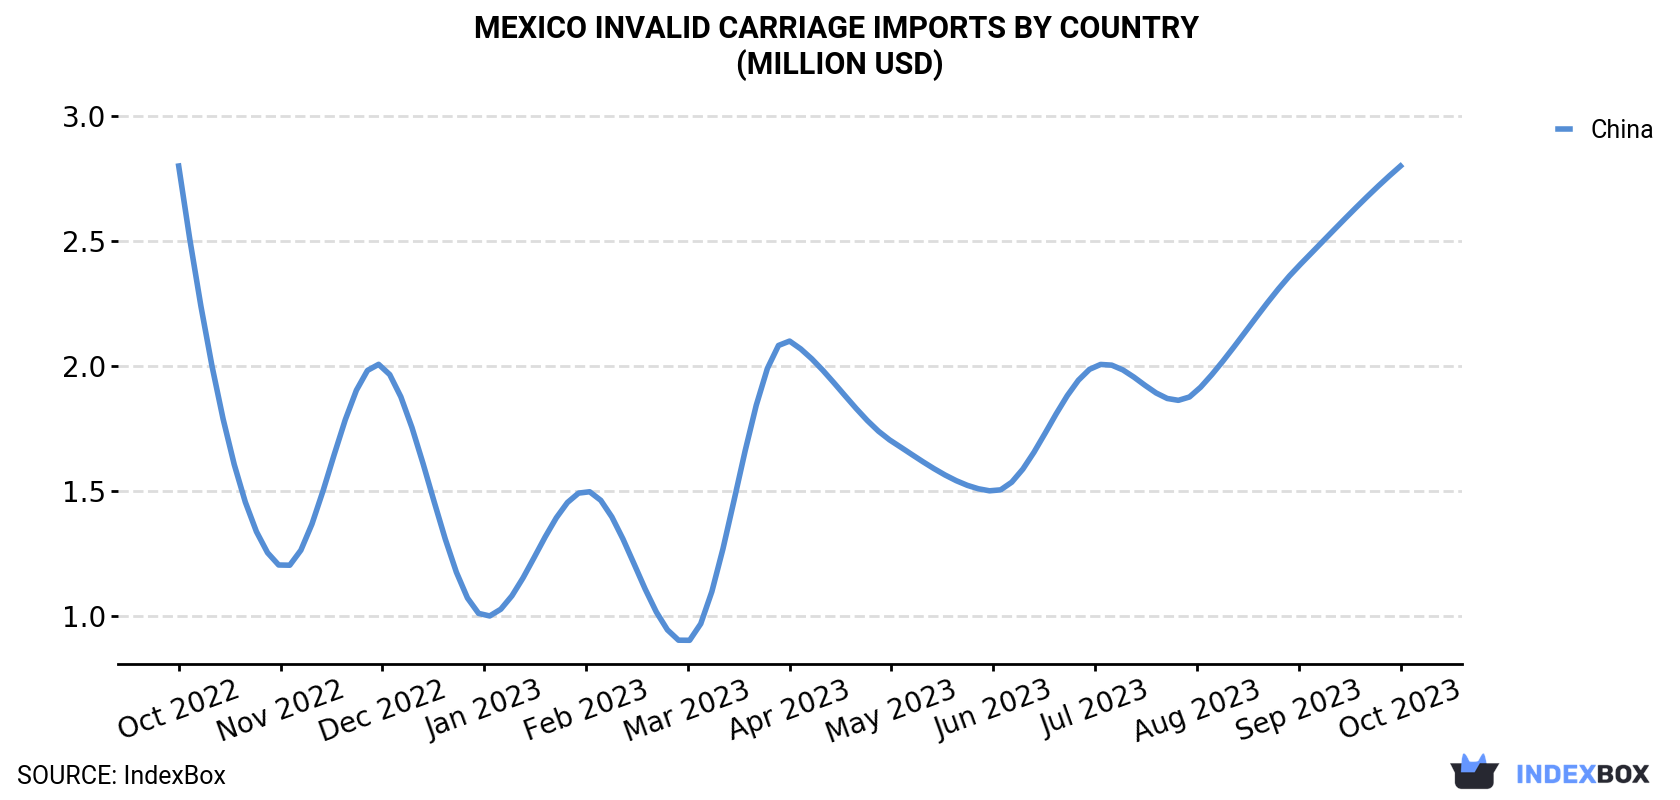 Mexico Invalid Carriage Imports By Country (Million USD)